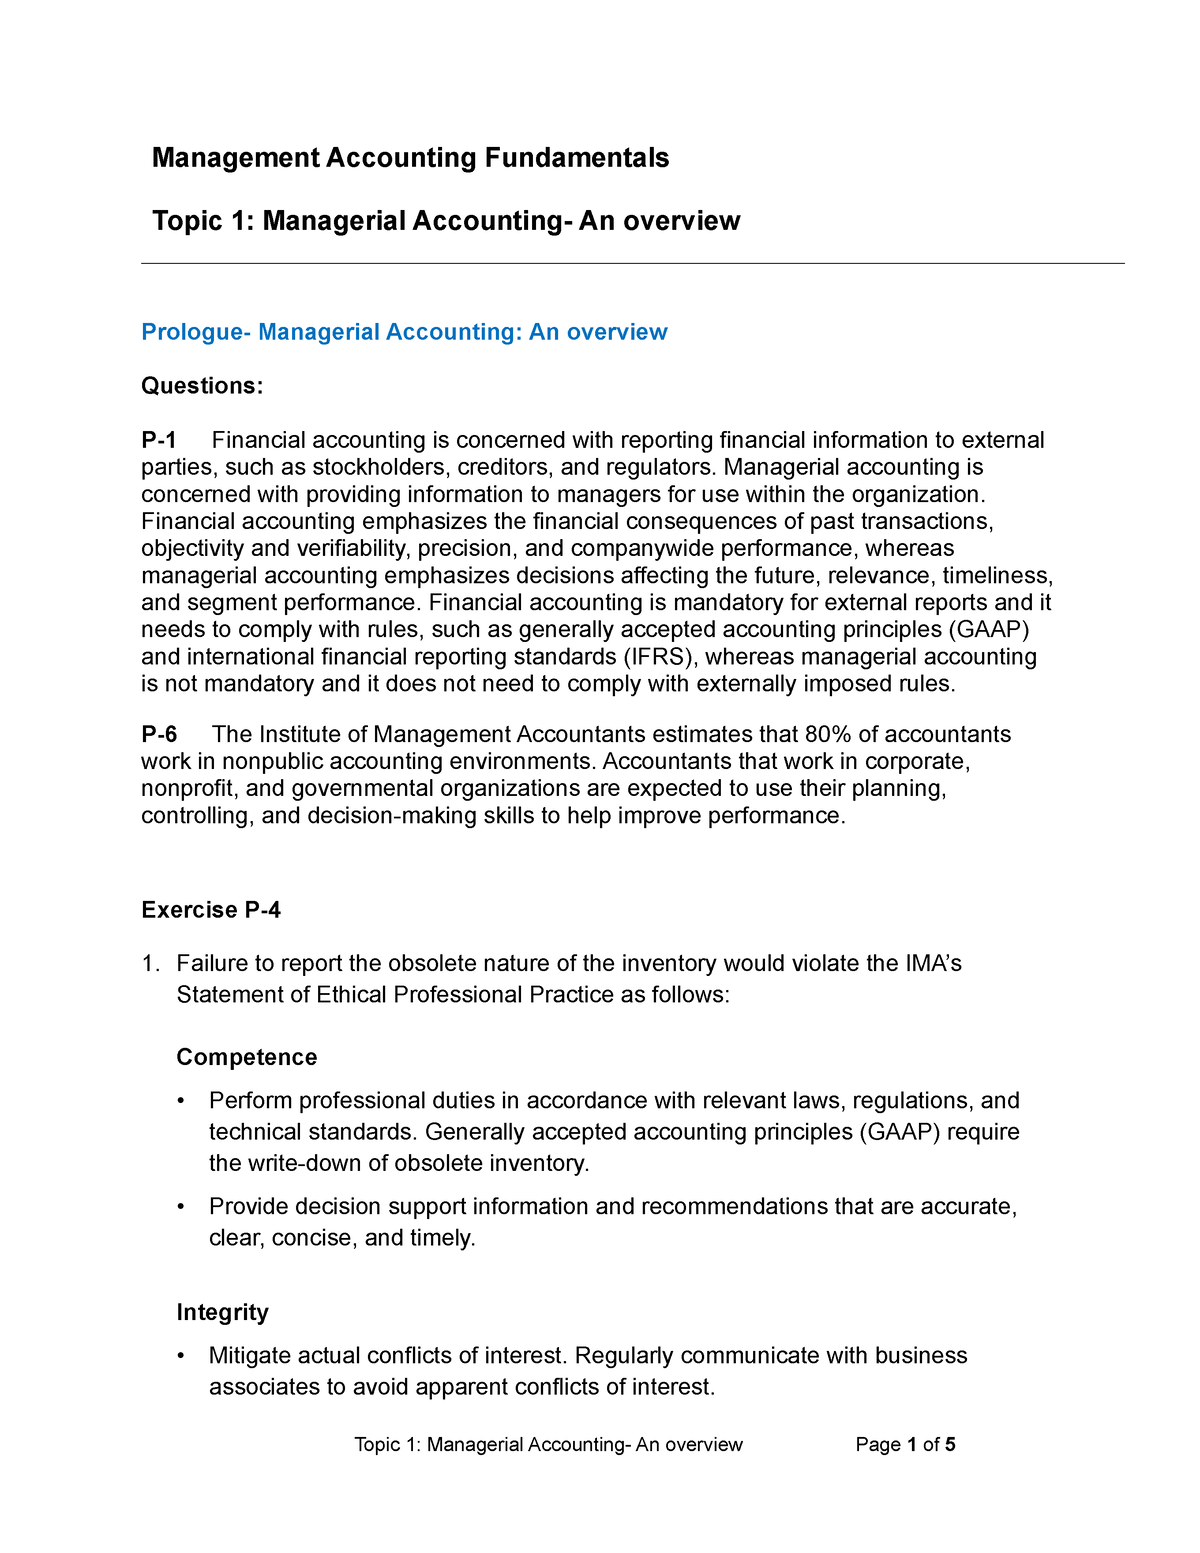 managerial accounting term paper topics